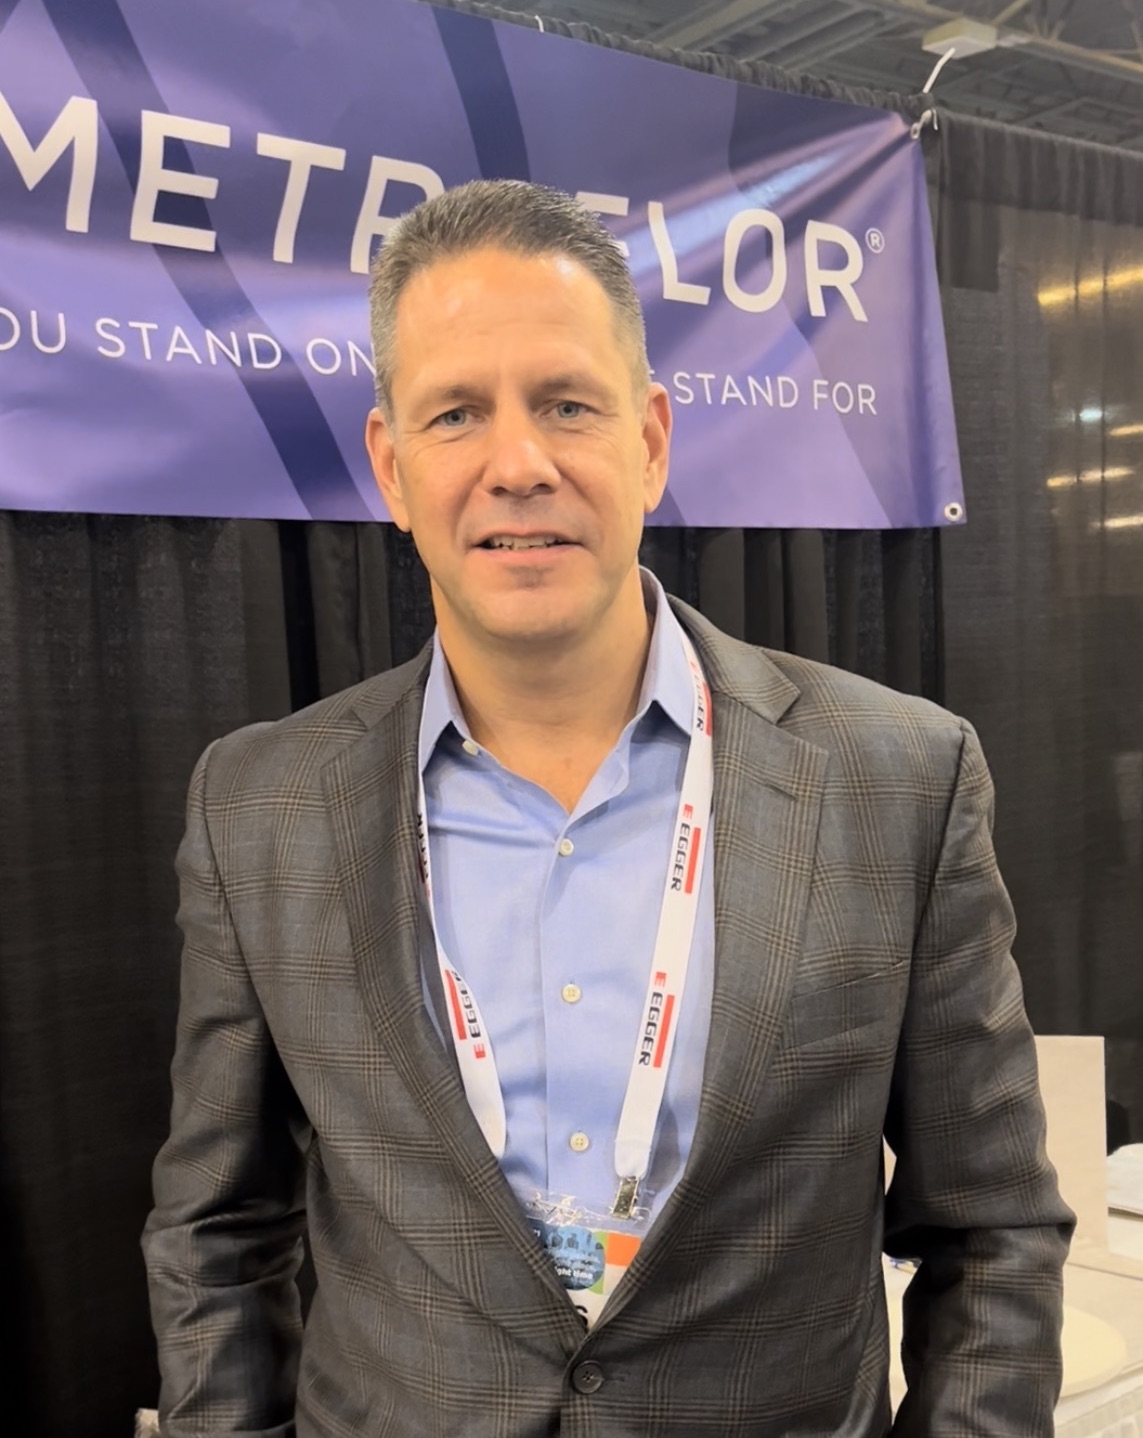 Metroflor's Russ Rogg covers the important topics at NAFCD 2021.